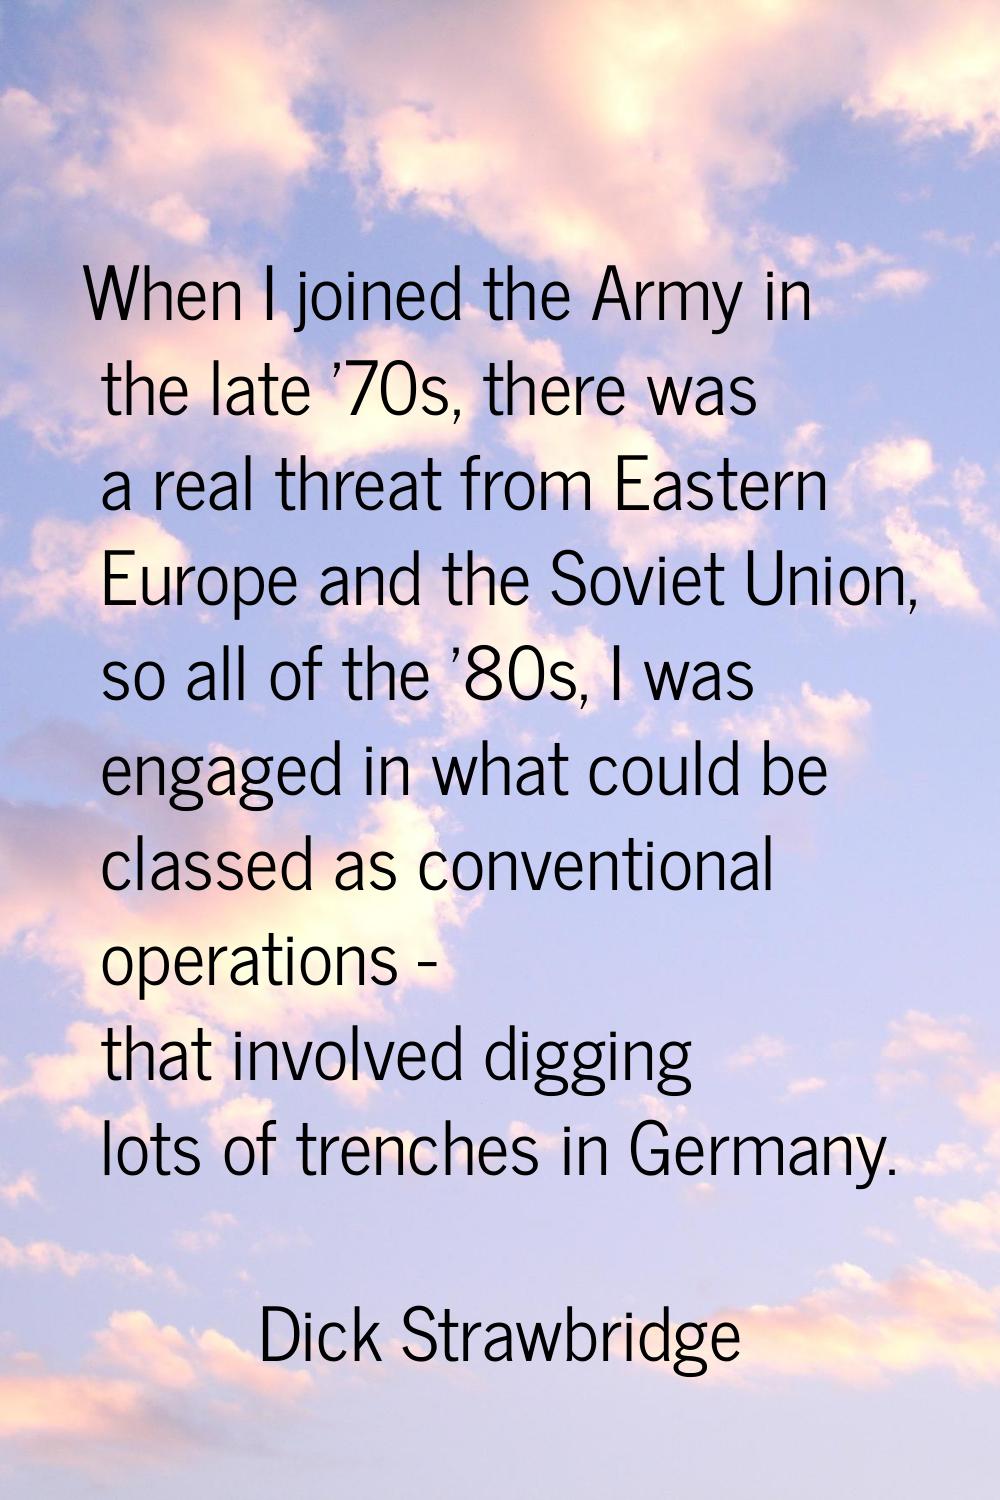 When I joined the Army in the late '70s, there was a real threat from Eastern Europe and the Soviet